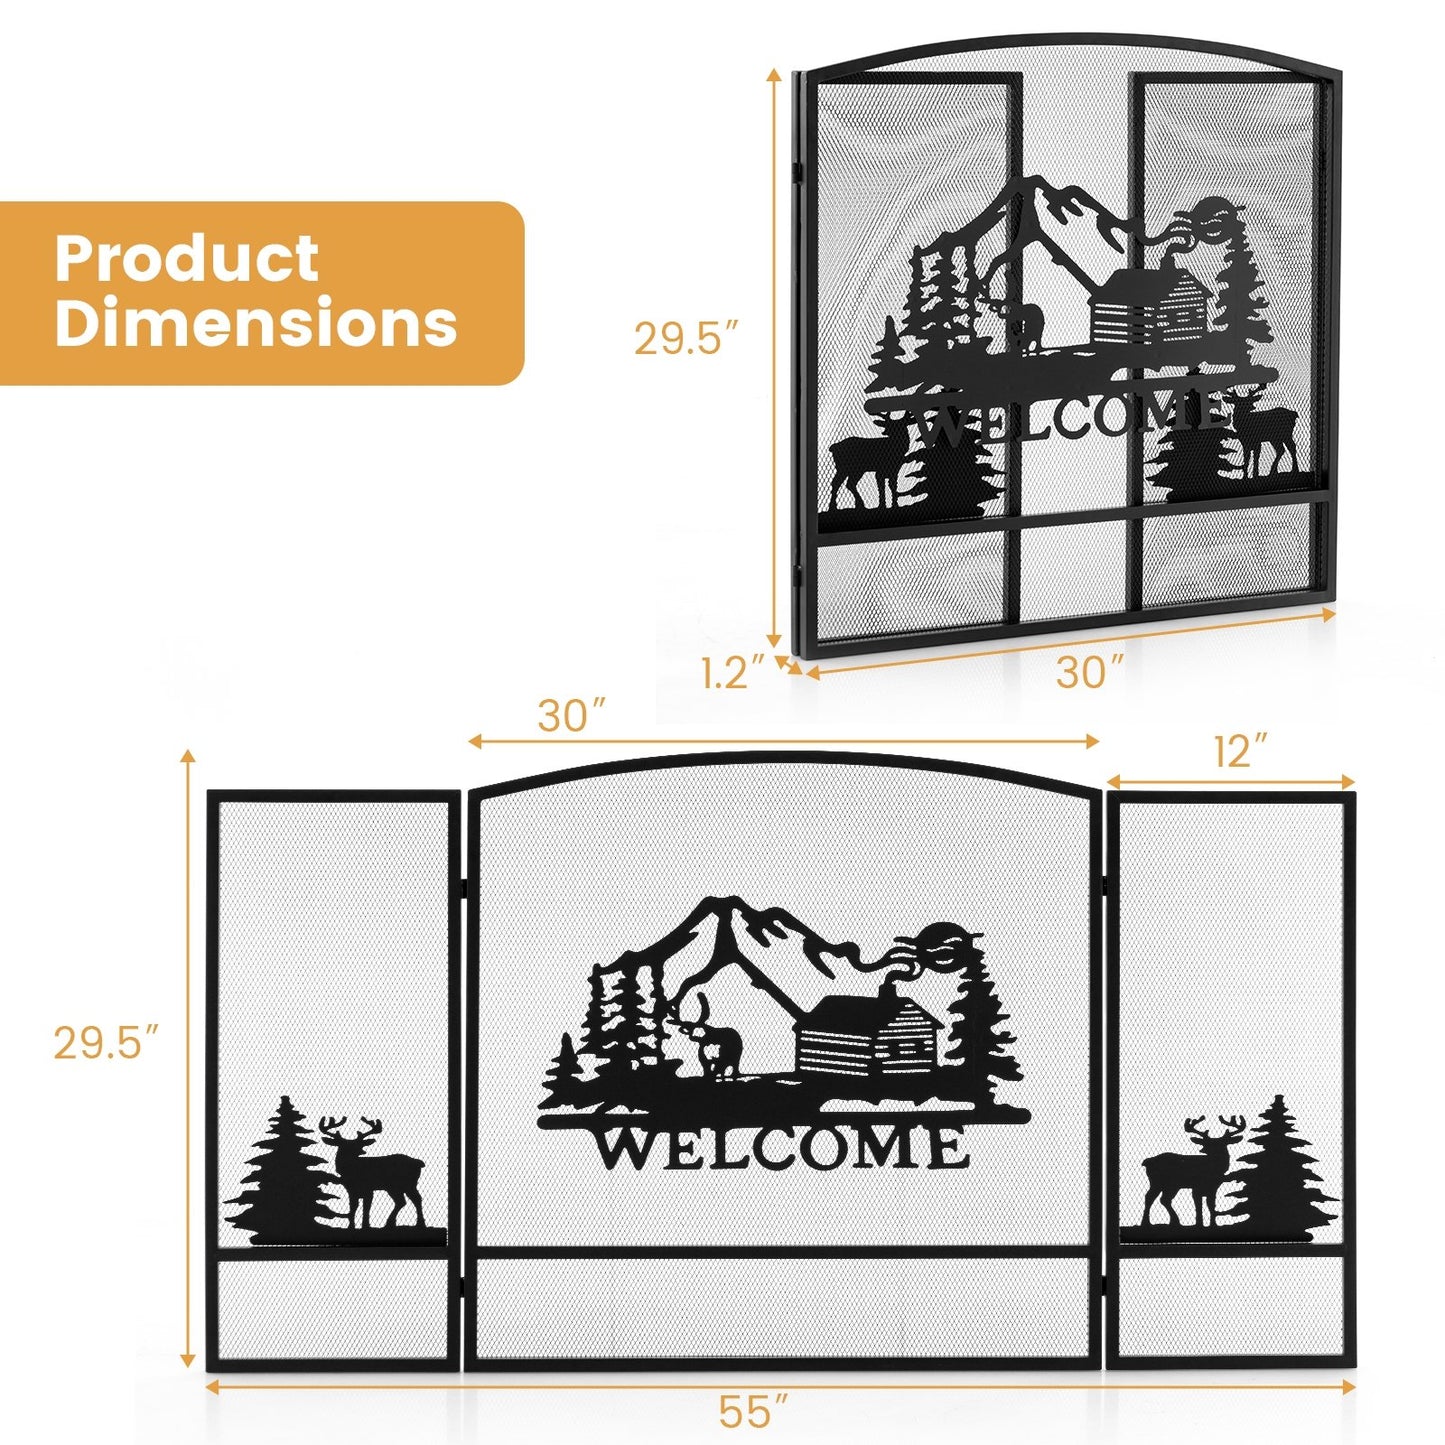 55 x 29.5 Inch Fireplace Screen with Natural Scenery and Moose Pattern, Black